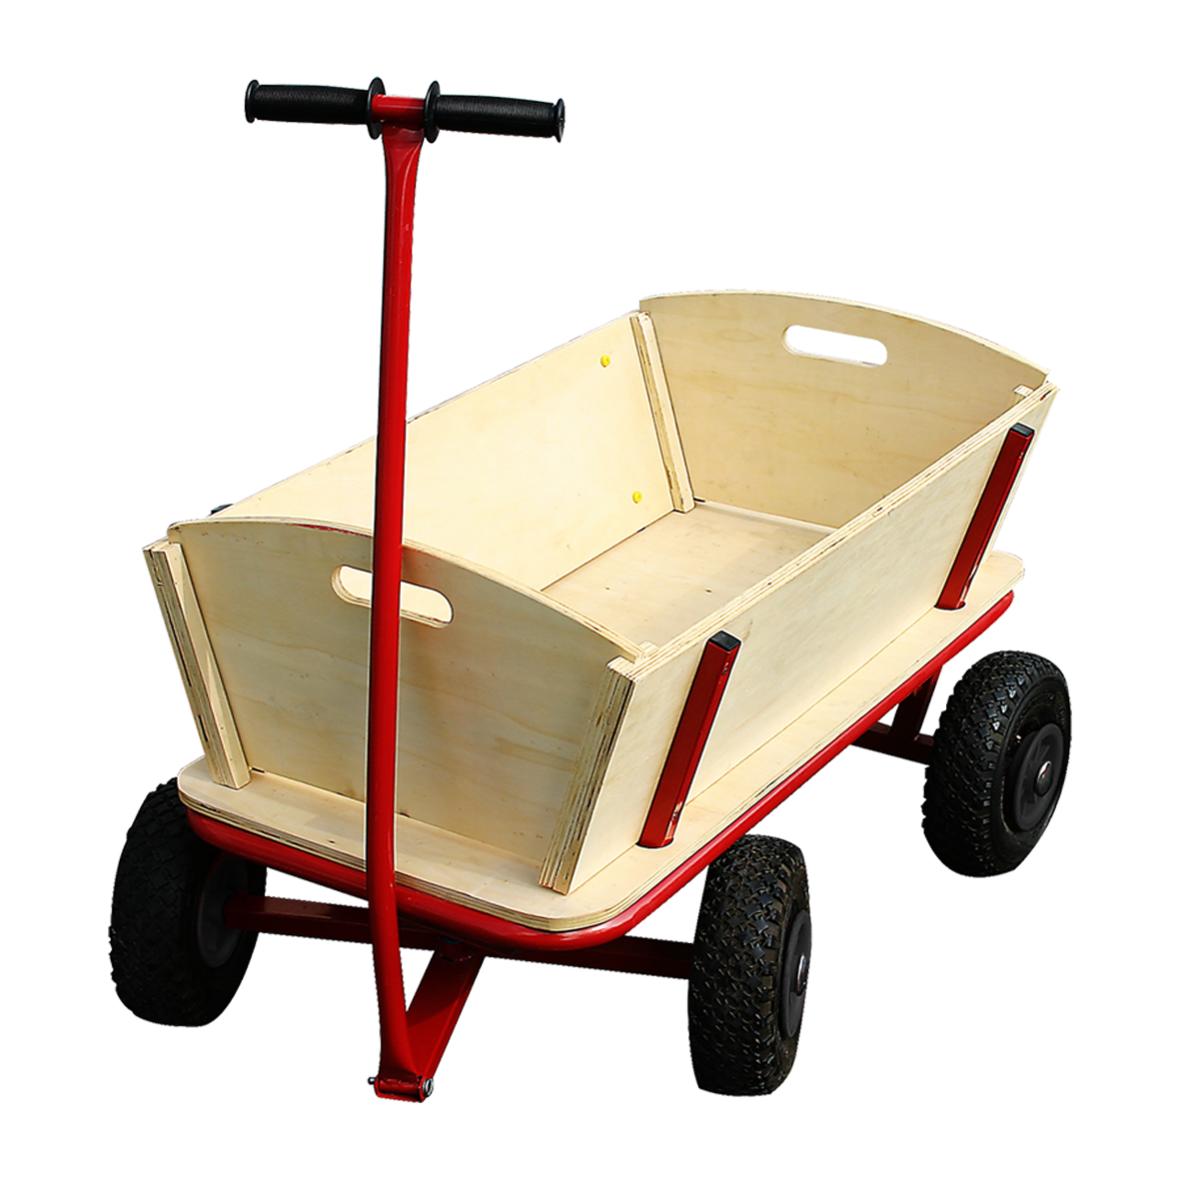 Large Bisham hand cart made of MDF panel with red paint. It has a frame made from a 25mm iron rod and a rubber-coated handle. - Golborne